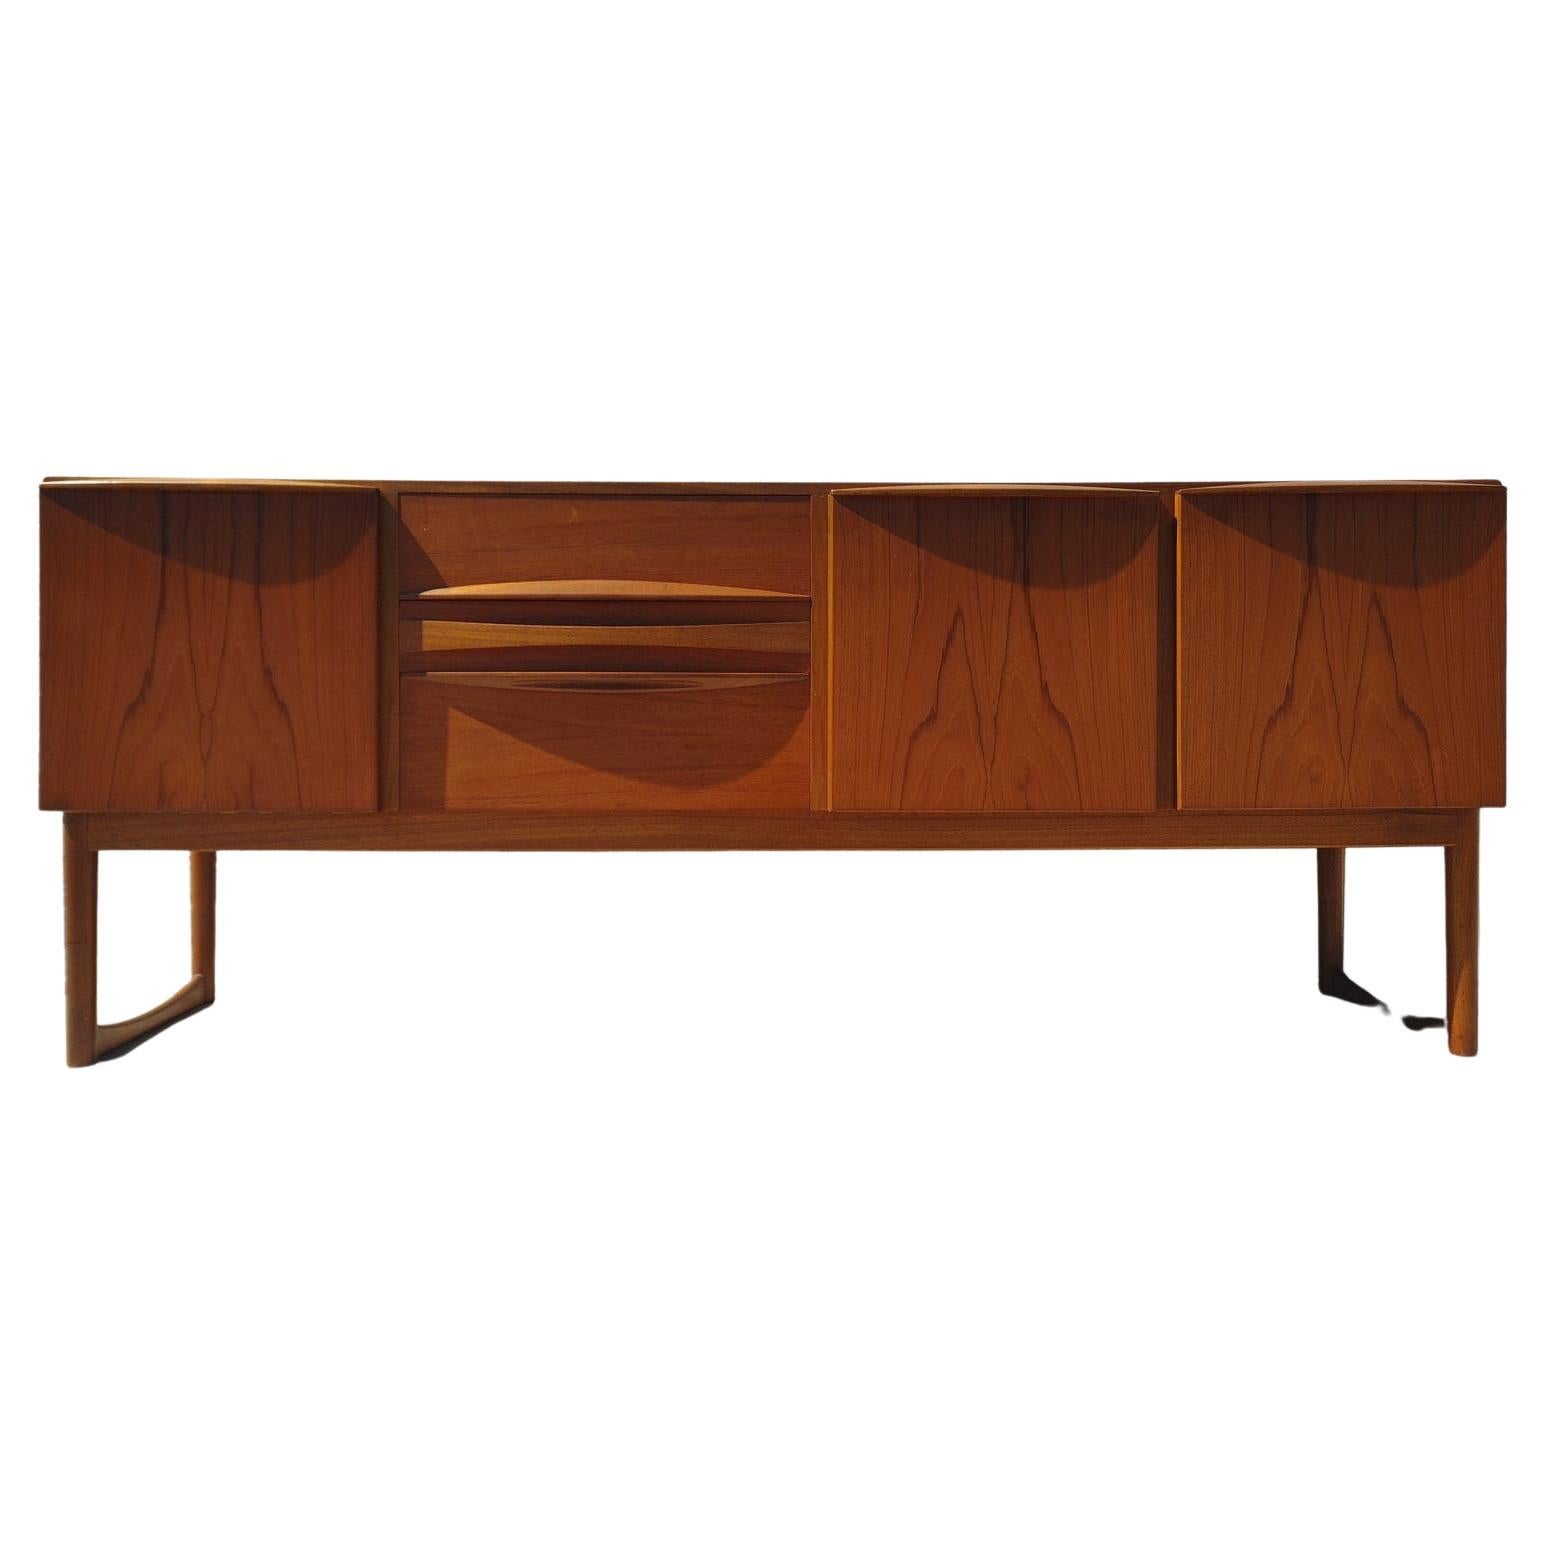 Mid Century Modern Teak Credenza by McIntosh

Above average vintage condition and structurally sound. Has some expected slight finish wear and scratching. Top has been refinished and does not have original factory finish. Outdoor listing pictures